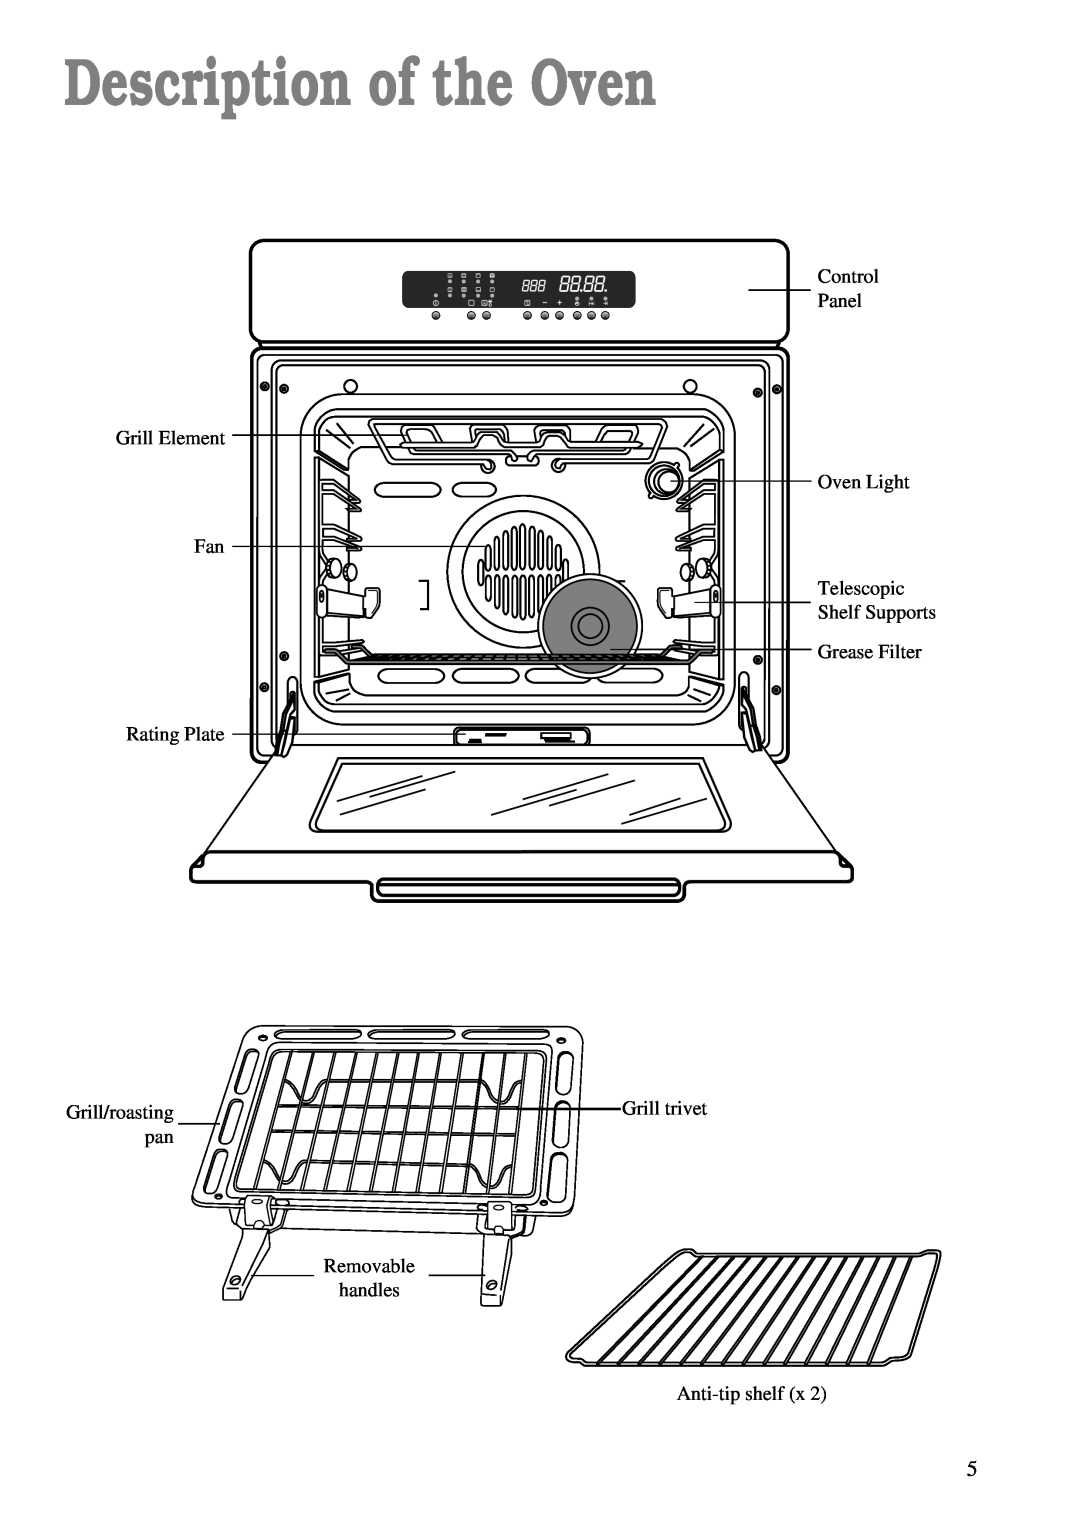 Zanussi ZBM 878 Description of the Oven, Grill Element Fan Rating Plate, Grill/roasting, Grill trivet, Removable handles 